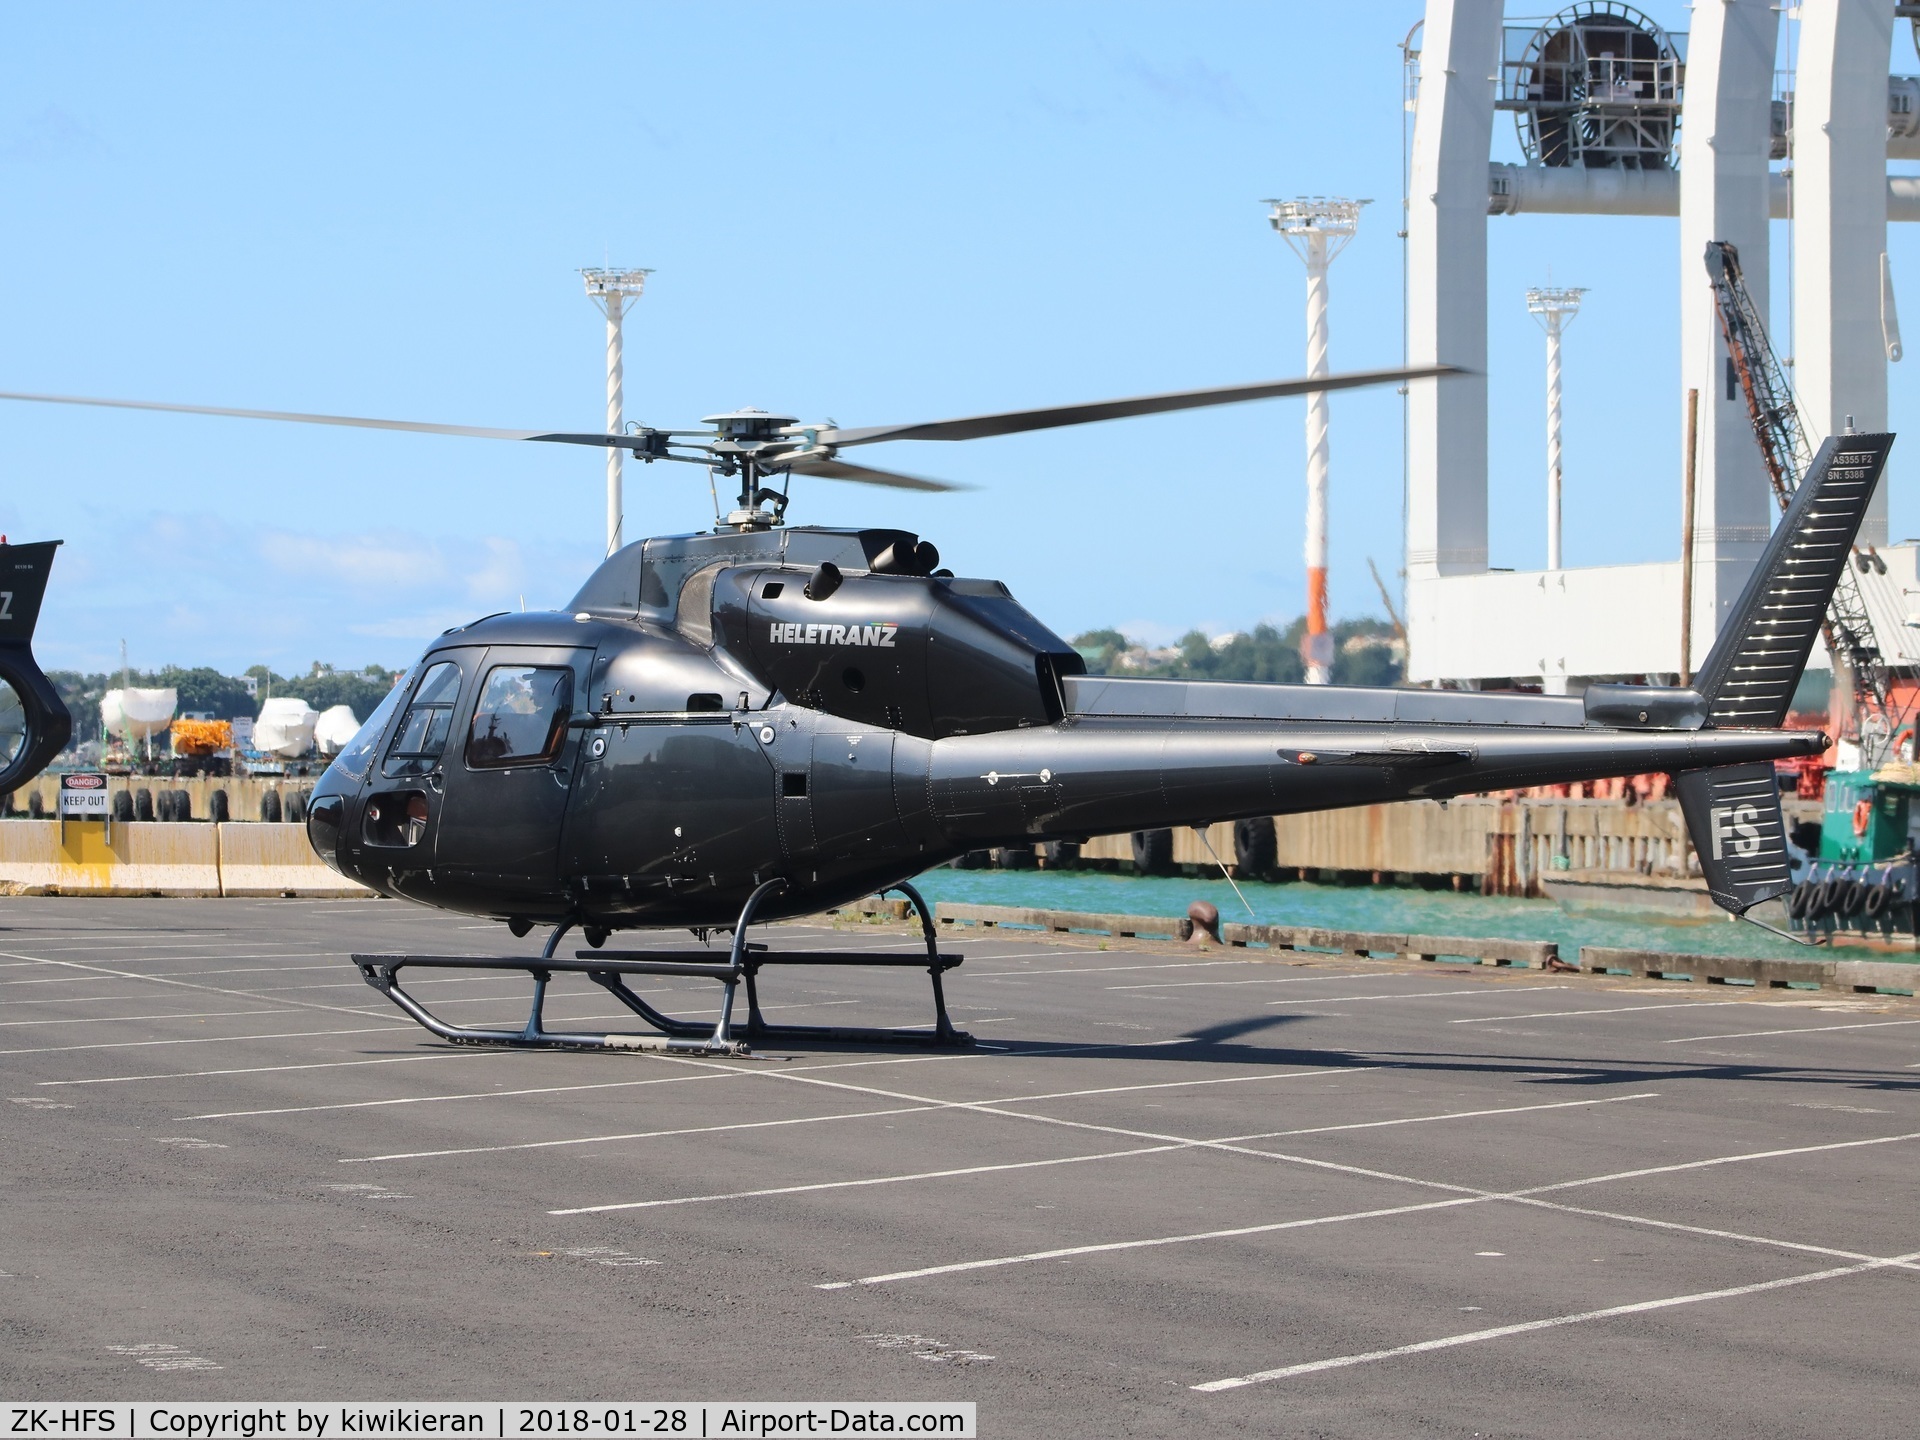 ZK-HFS, 1988 Eurocopter AS-355F-2 Ecureuil 2 C/N 5388, AT SeePort